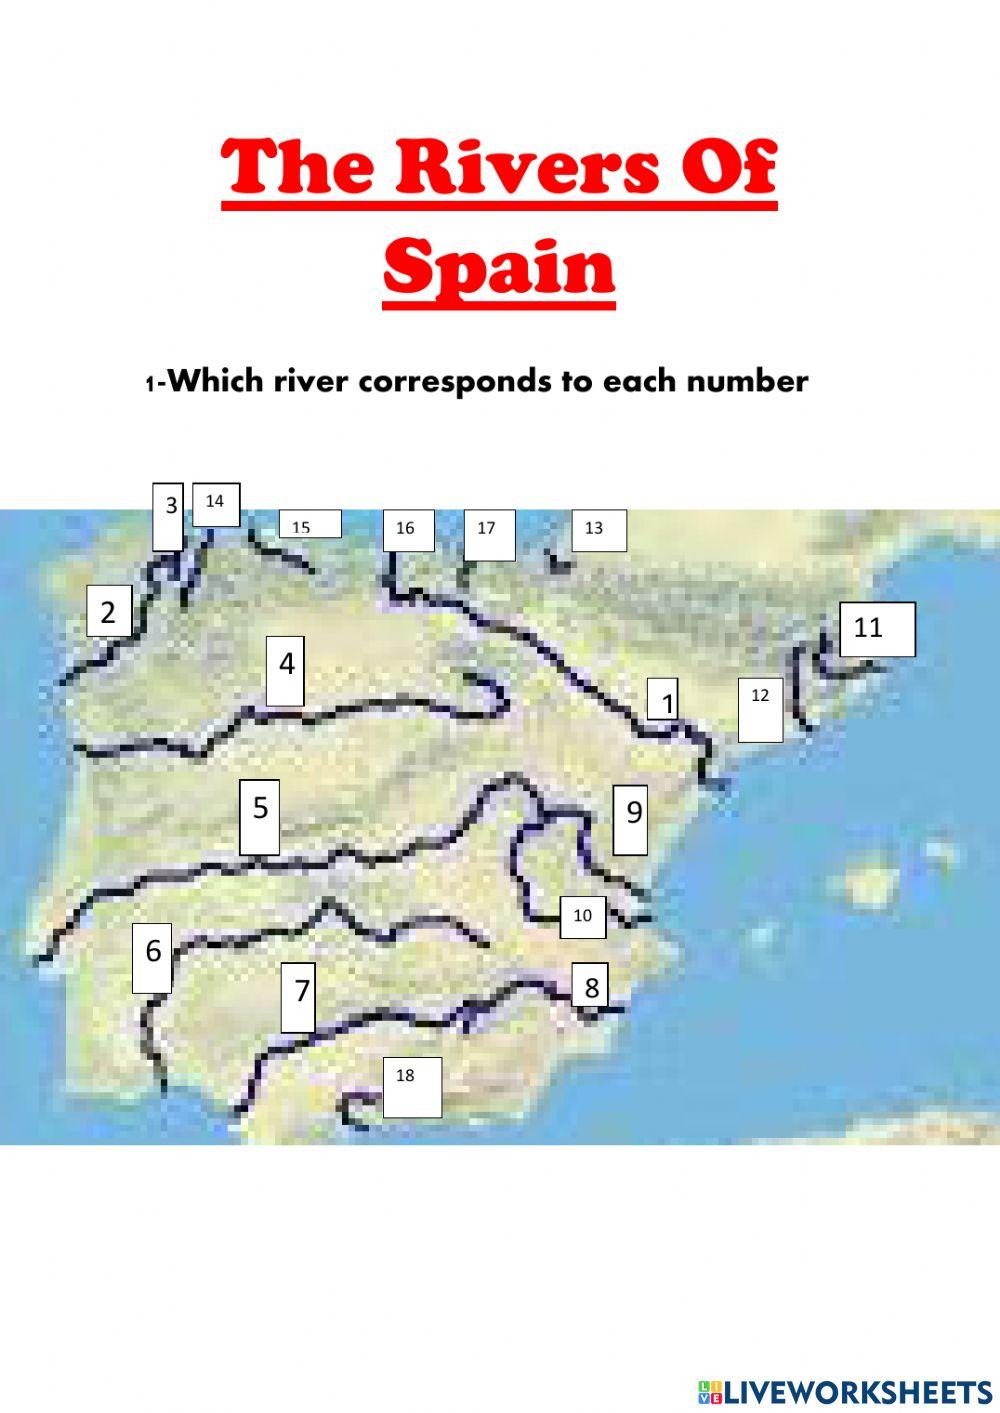 The Rivers Of Spain